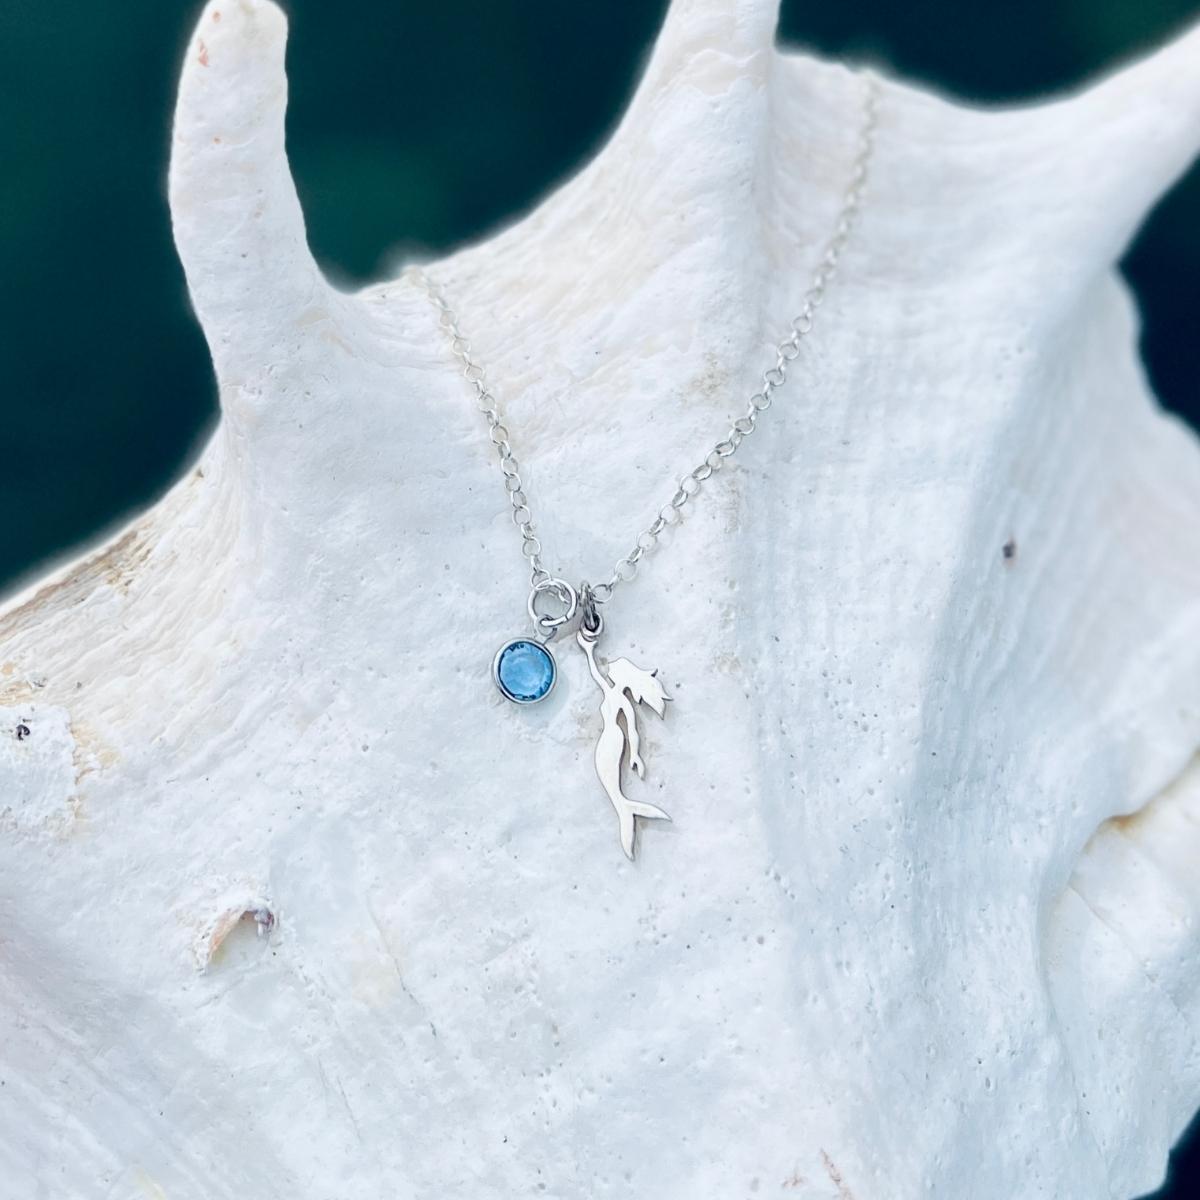 Sterling Silver Miss Scuba Mermaid Necklace with Swarovski Crystal This piece reflects Miss Scuba's sense of mystery and individuality, and beckons the free spirit in every self-made women.  Mermaids symbolize Love, Beauty, Mystery, Untamed Spirit and Femininity.